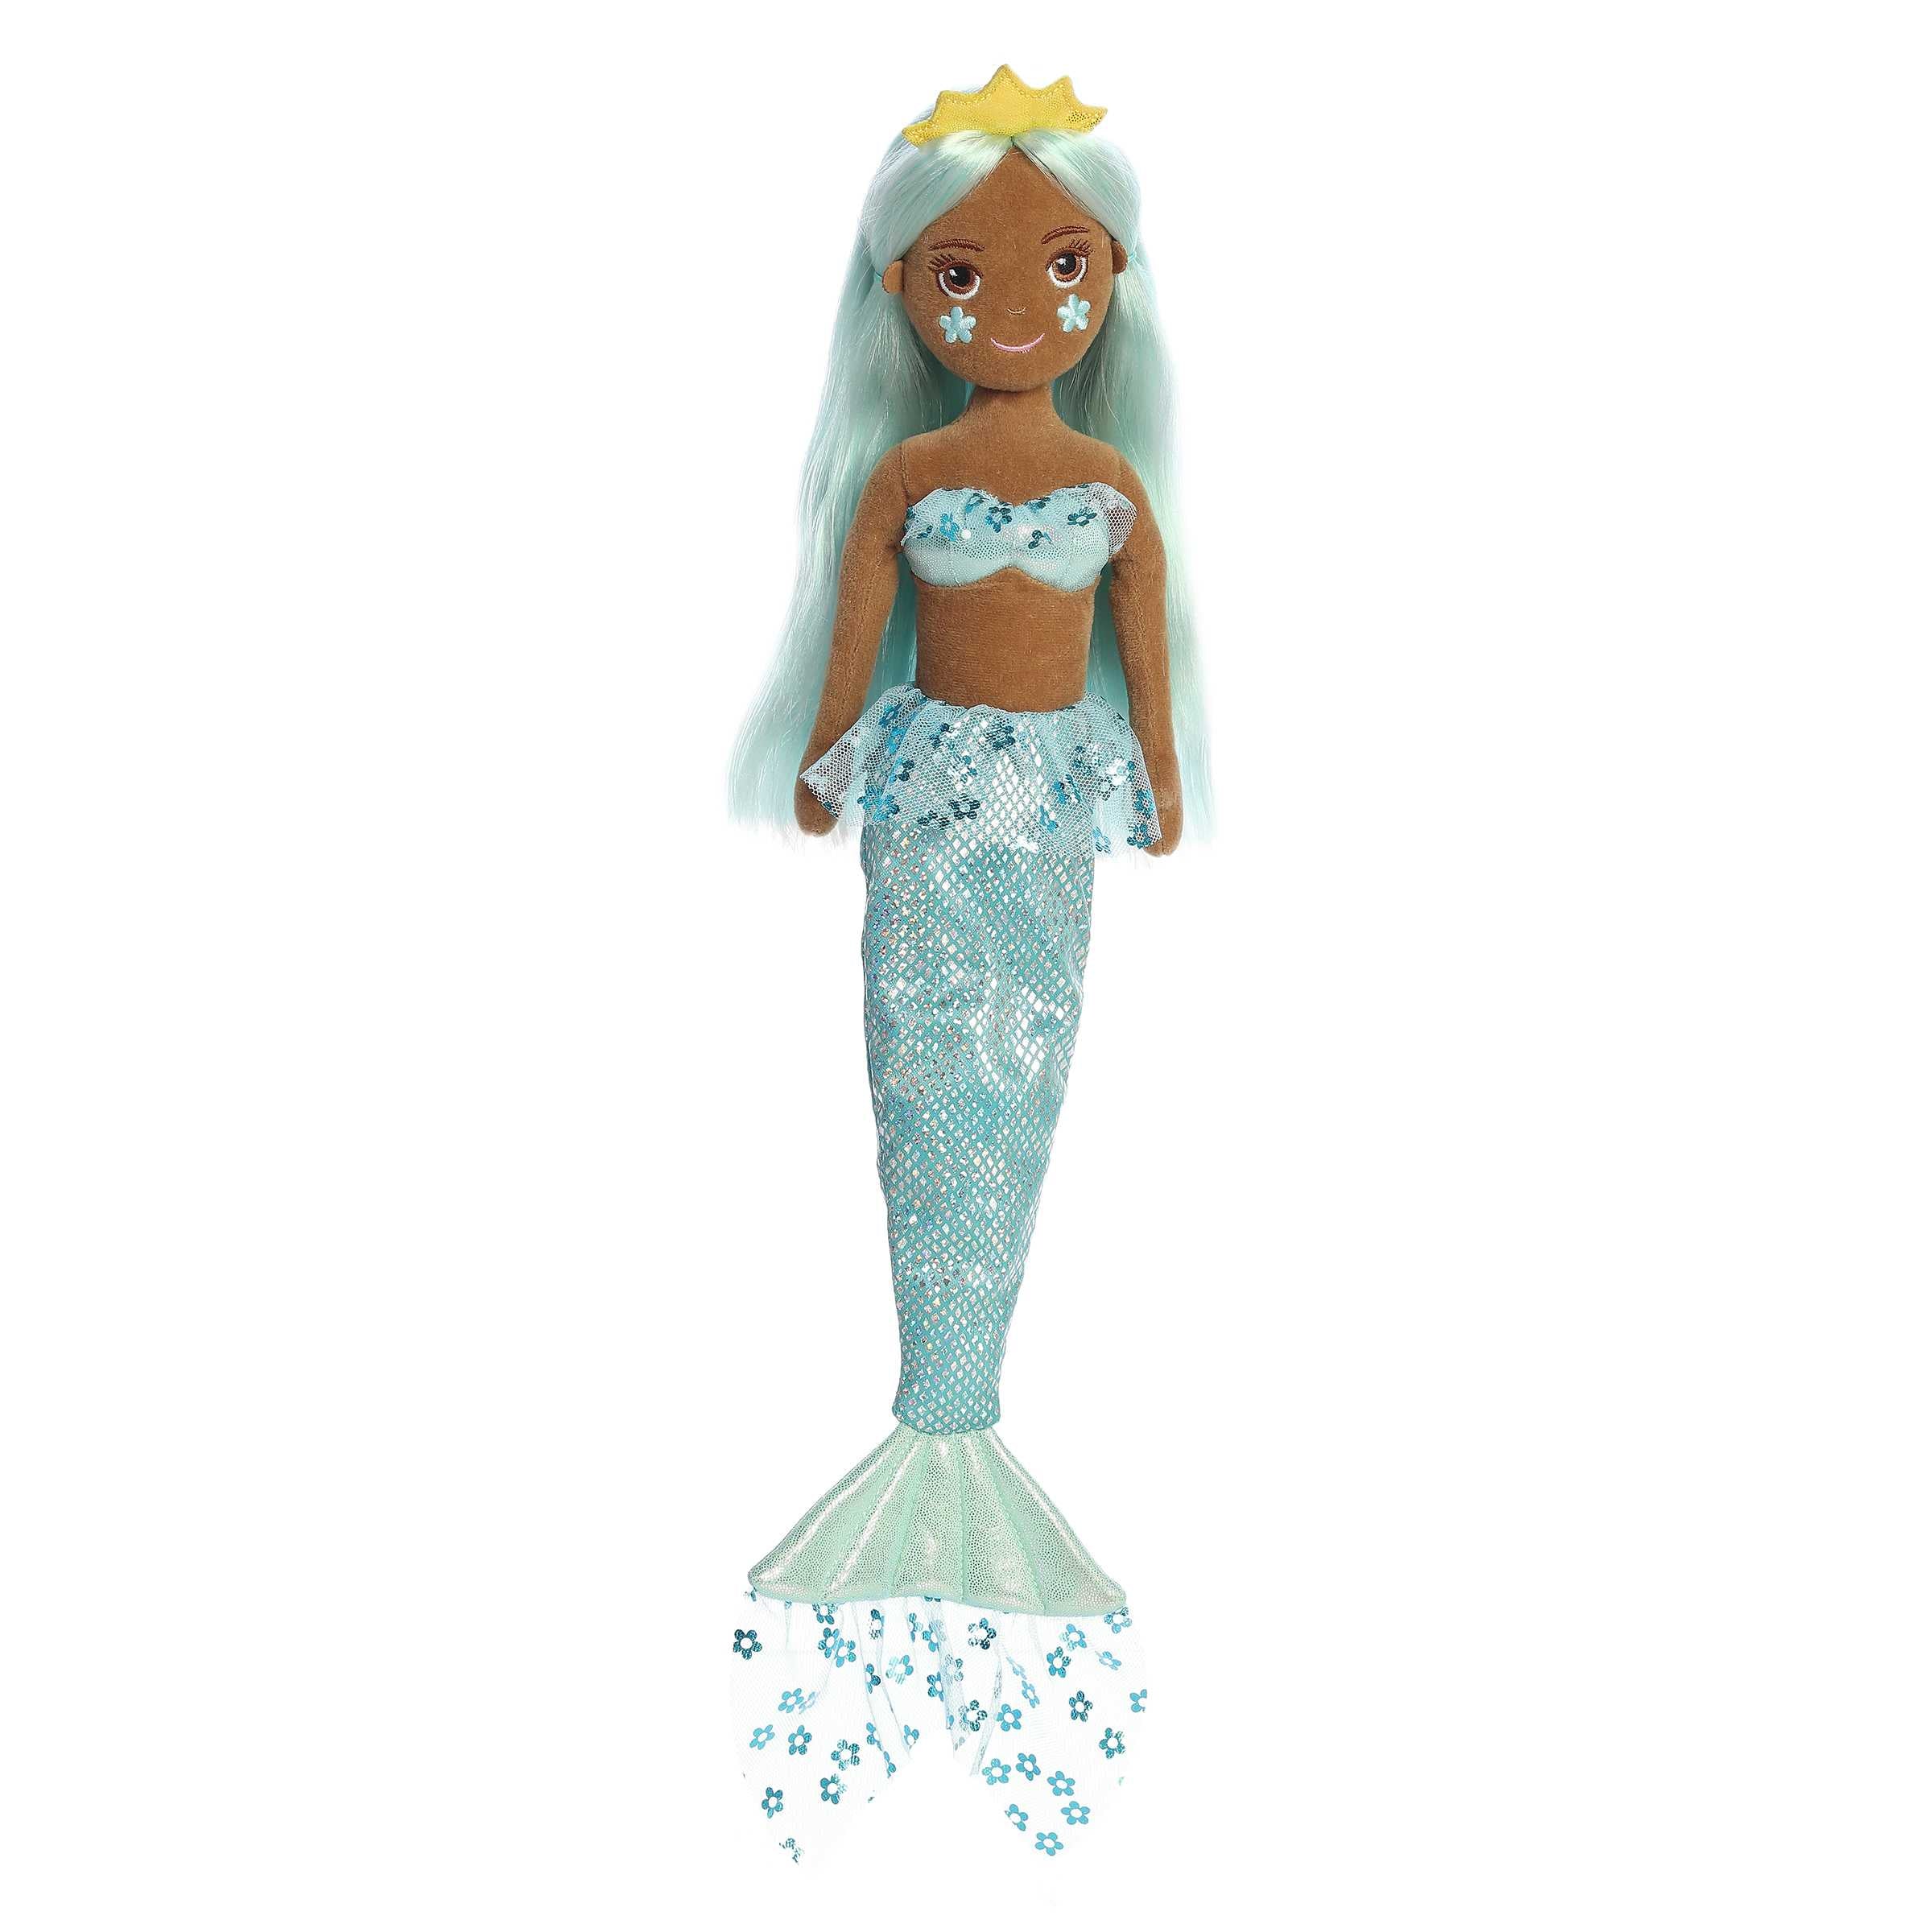 Blue floral mermaid plush, Aqua Fleur, with a shimmering tail and tiara, ideal for serene play and stylish decor.